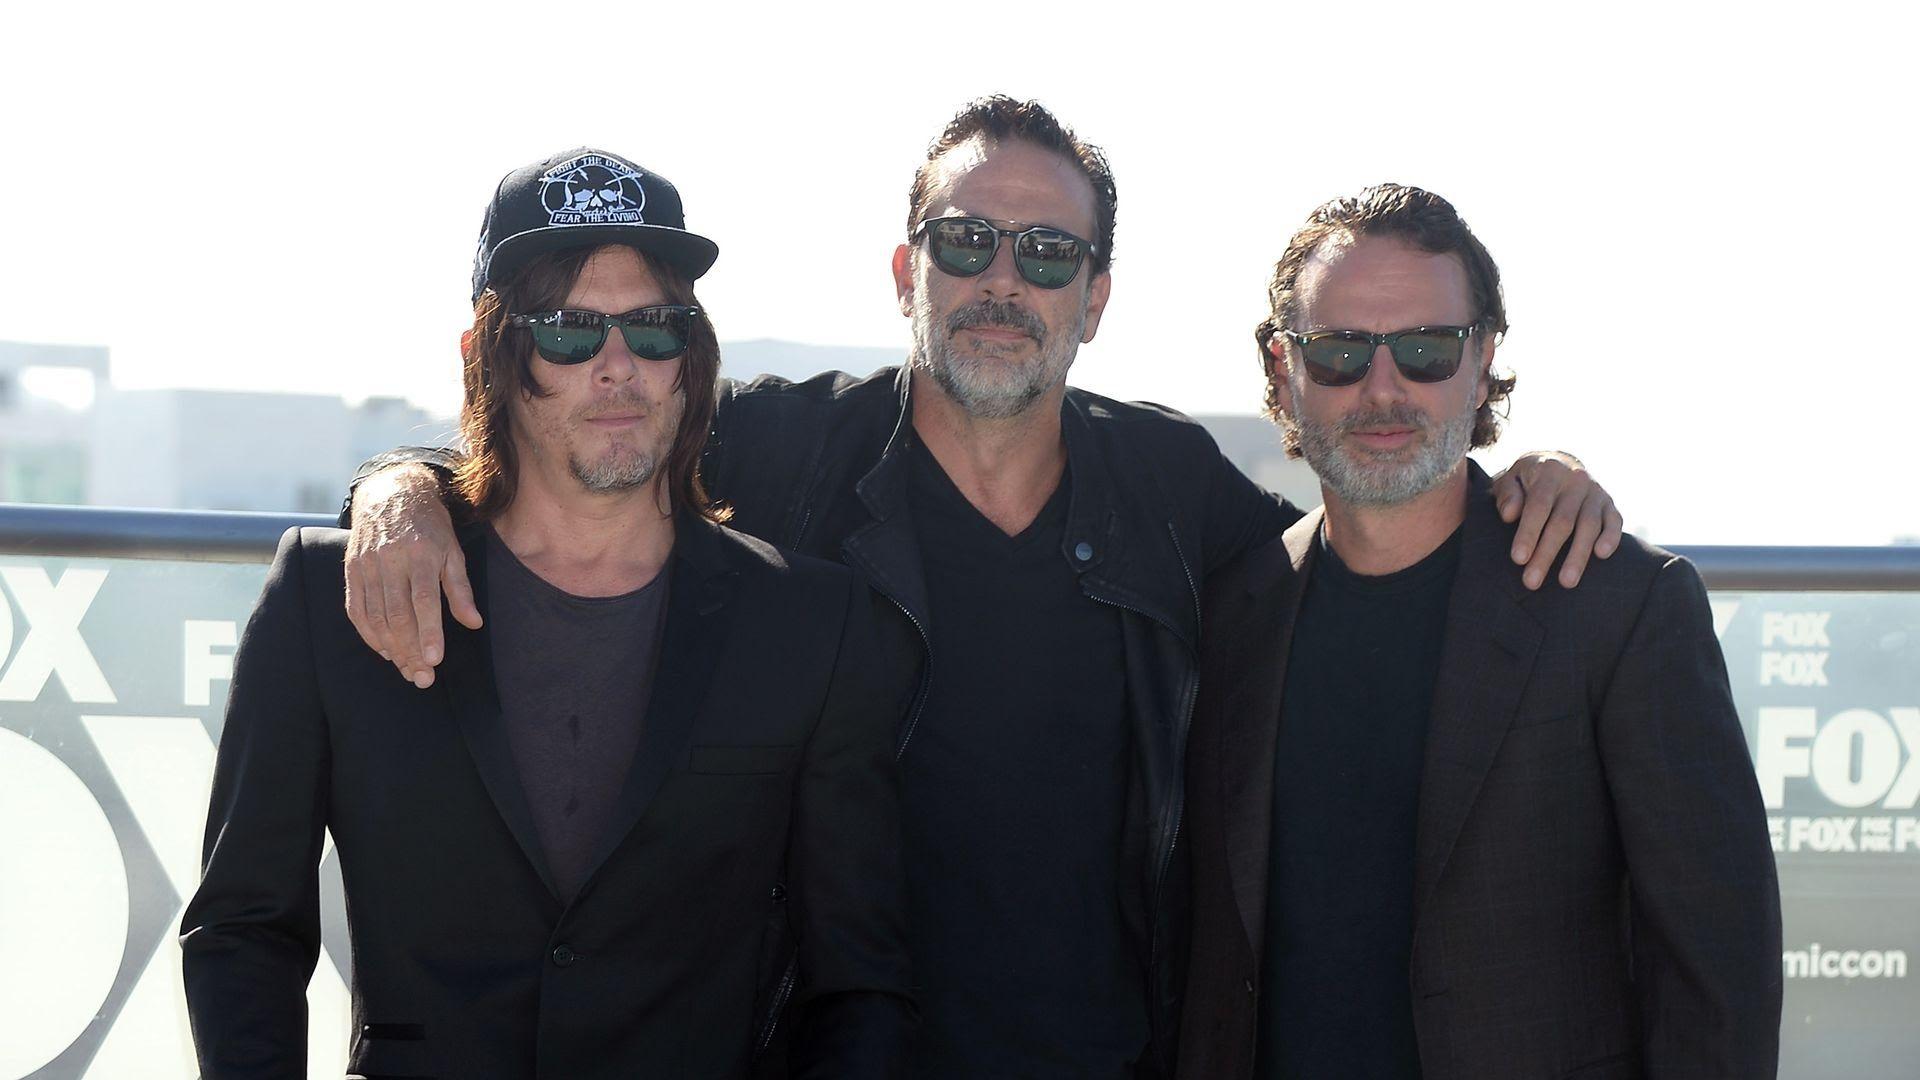 Our 3 TWD Badasses! Norman Reedus, Andrew Lincoln & Jeffrey